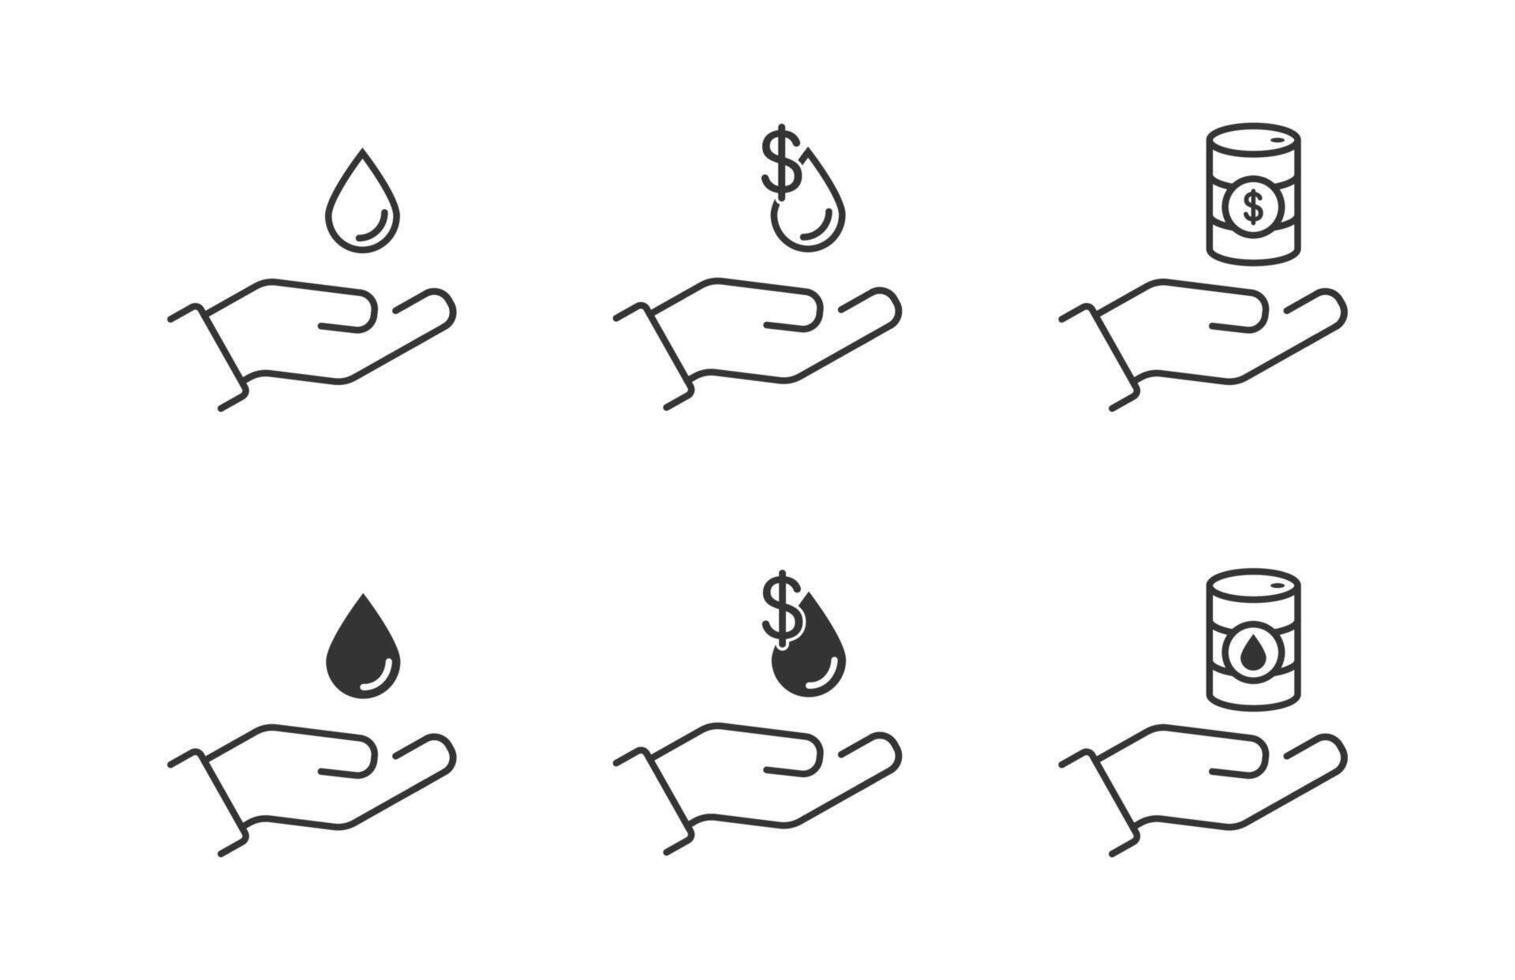 Hand and barrel of oil. Barrel money icon. Drop of oil and dollar symbol. Vector illustration.